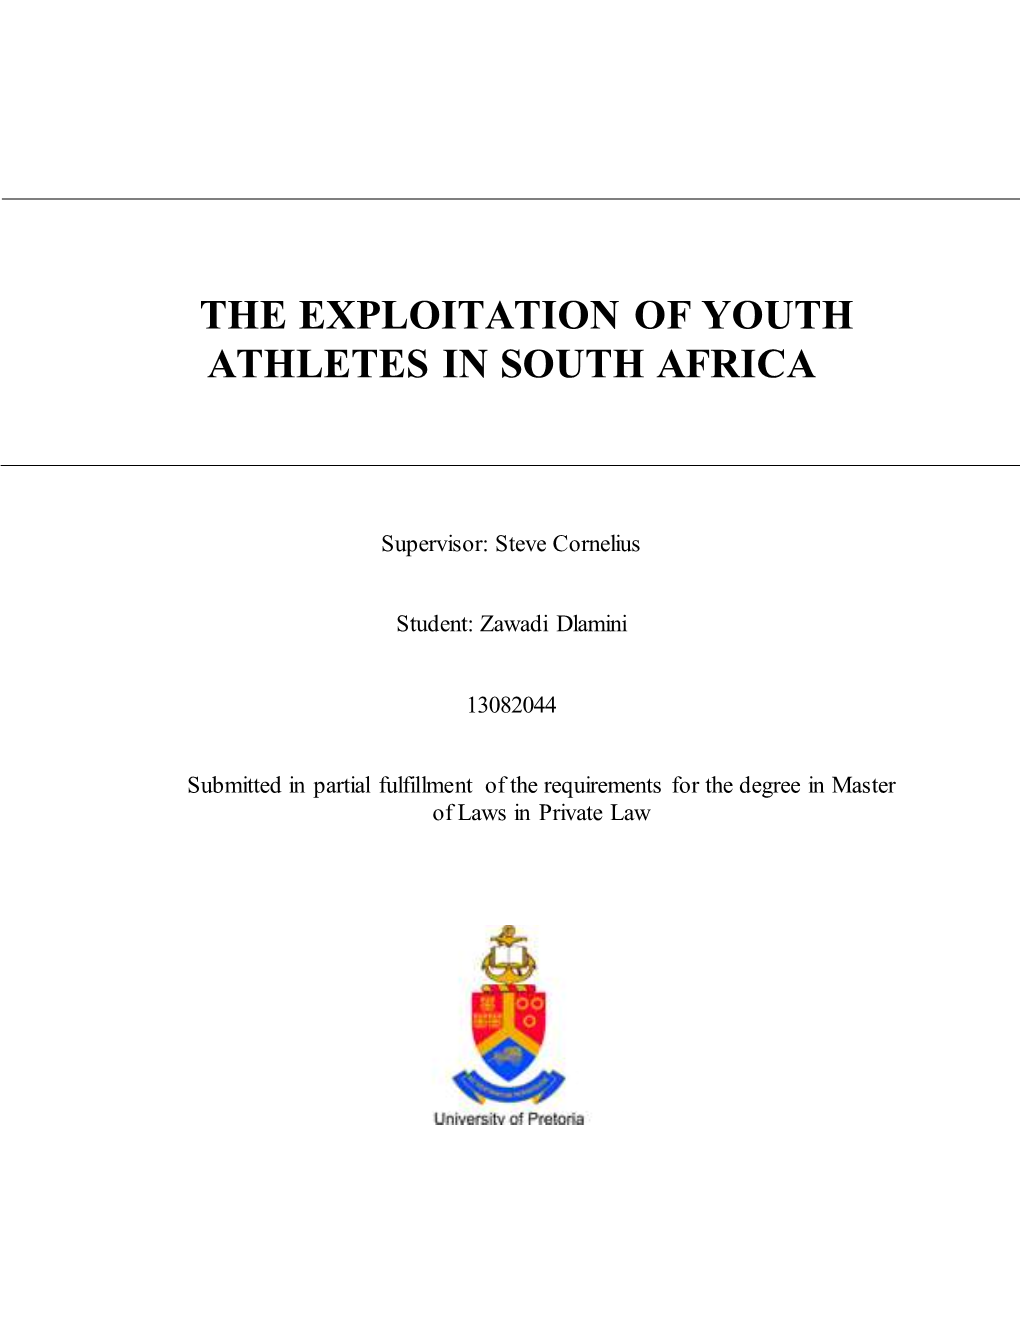 The Exploitation of Youth Athletes in South Africa